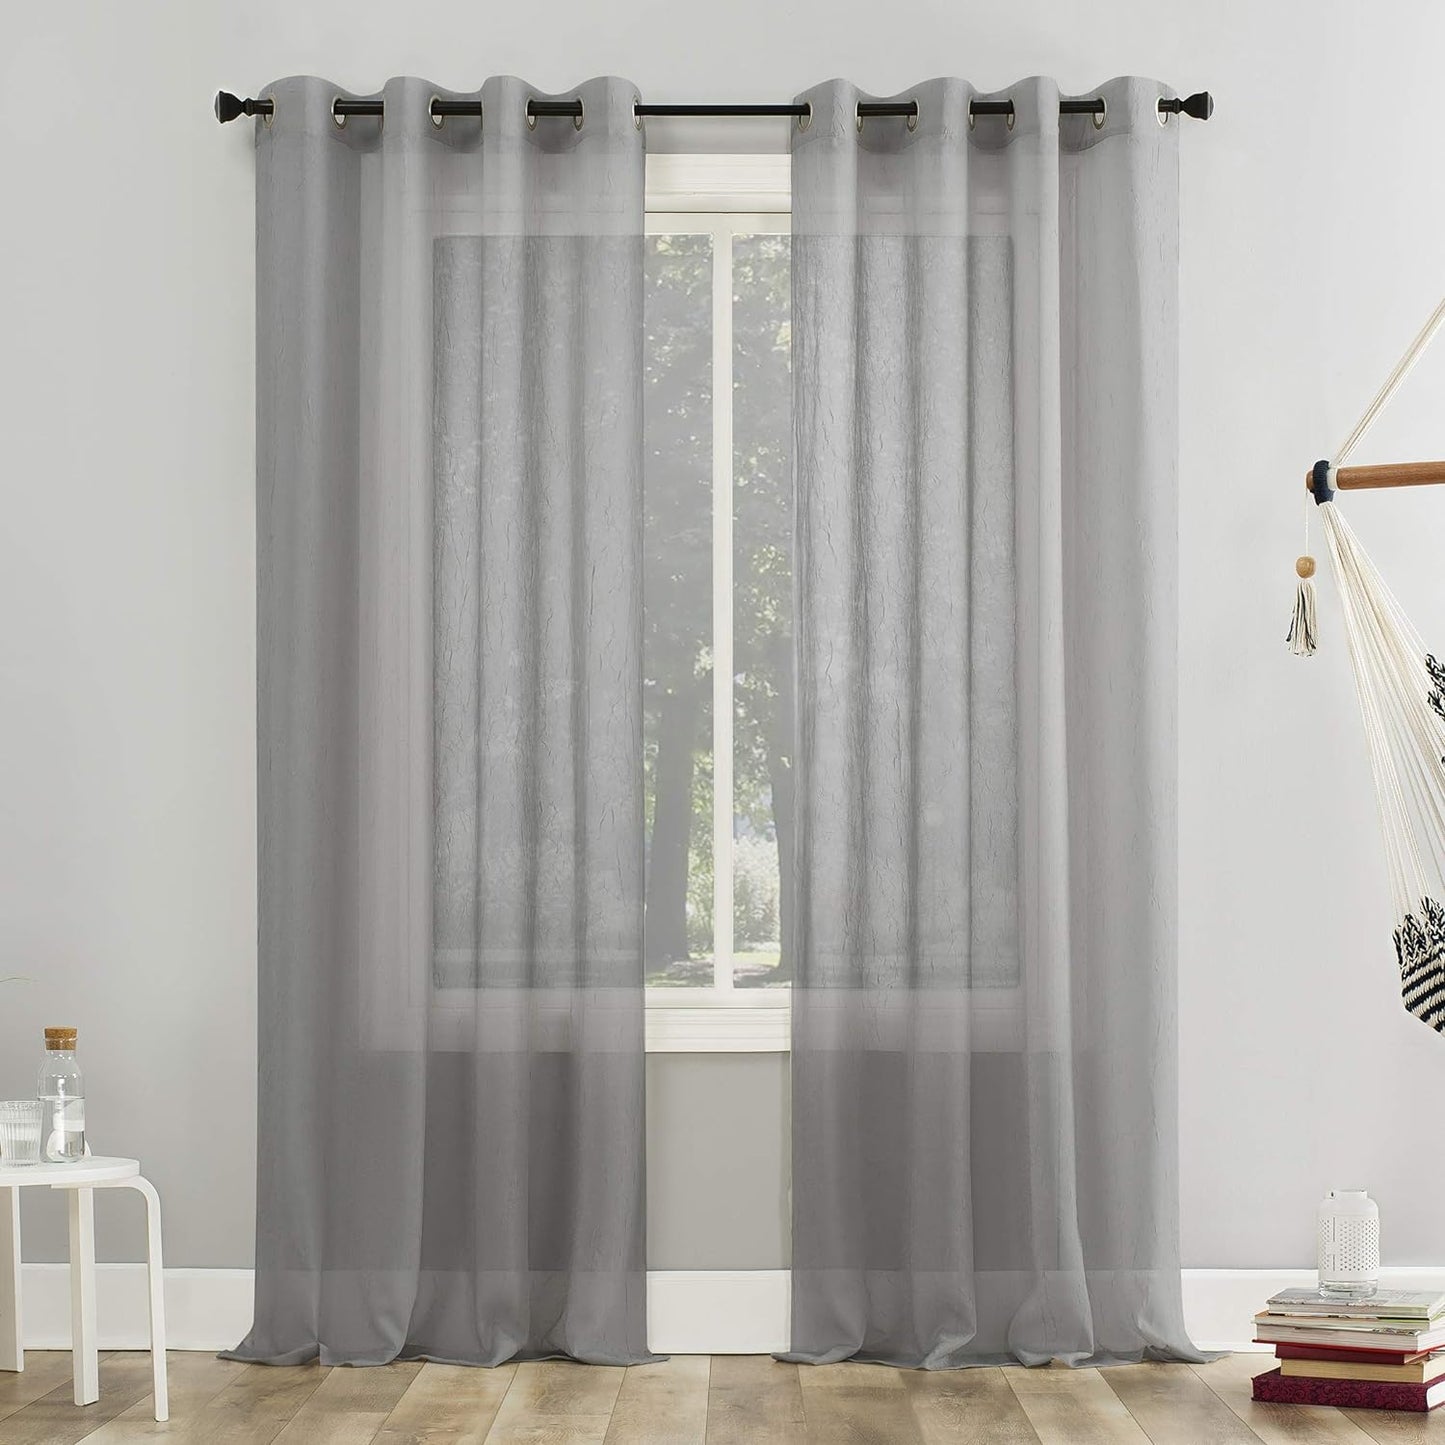 No. 918 Erica Crushed Sheer Voile Grommet Curtain Panel 84.00" X 51.00"  No. 918 Silver Gray 51" X 95" Panel 